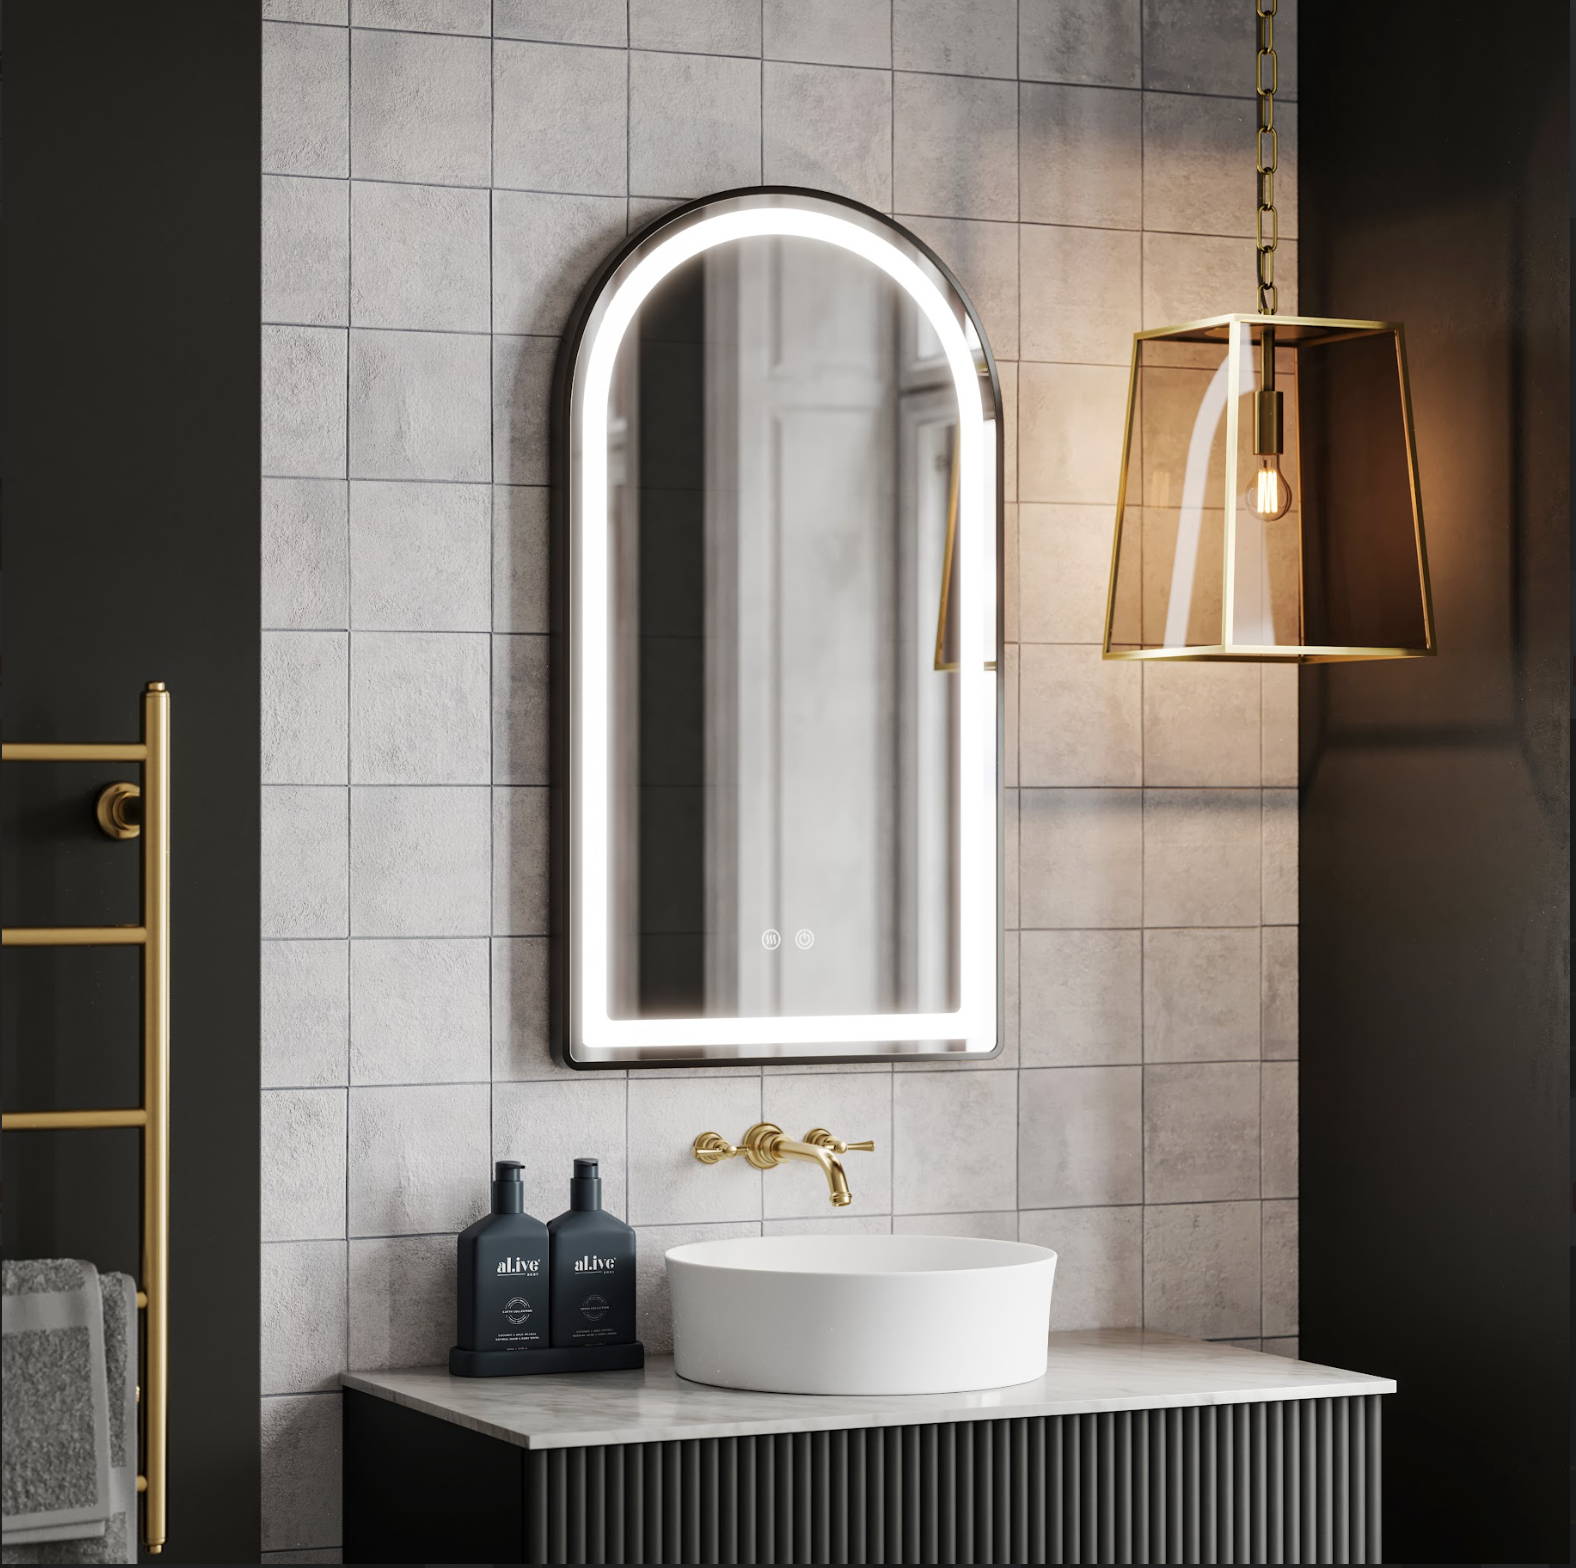 Moody bathroom with arch mirror and pendant light